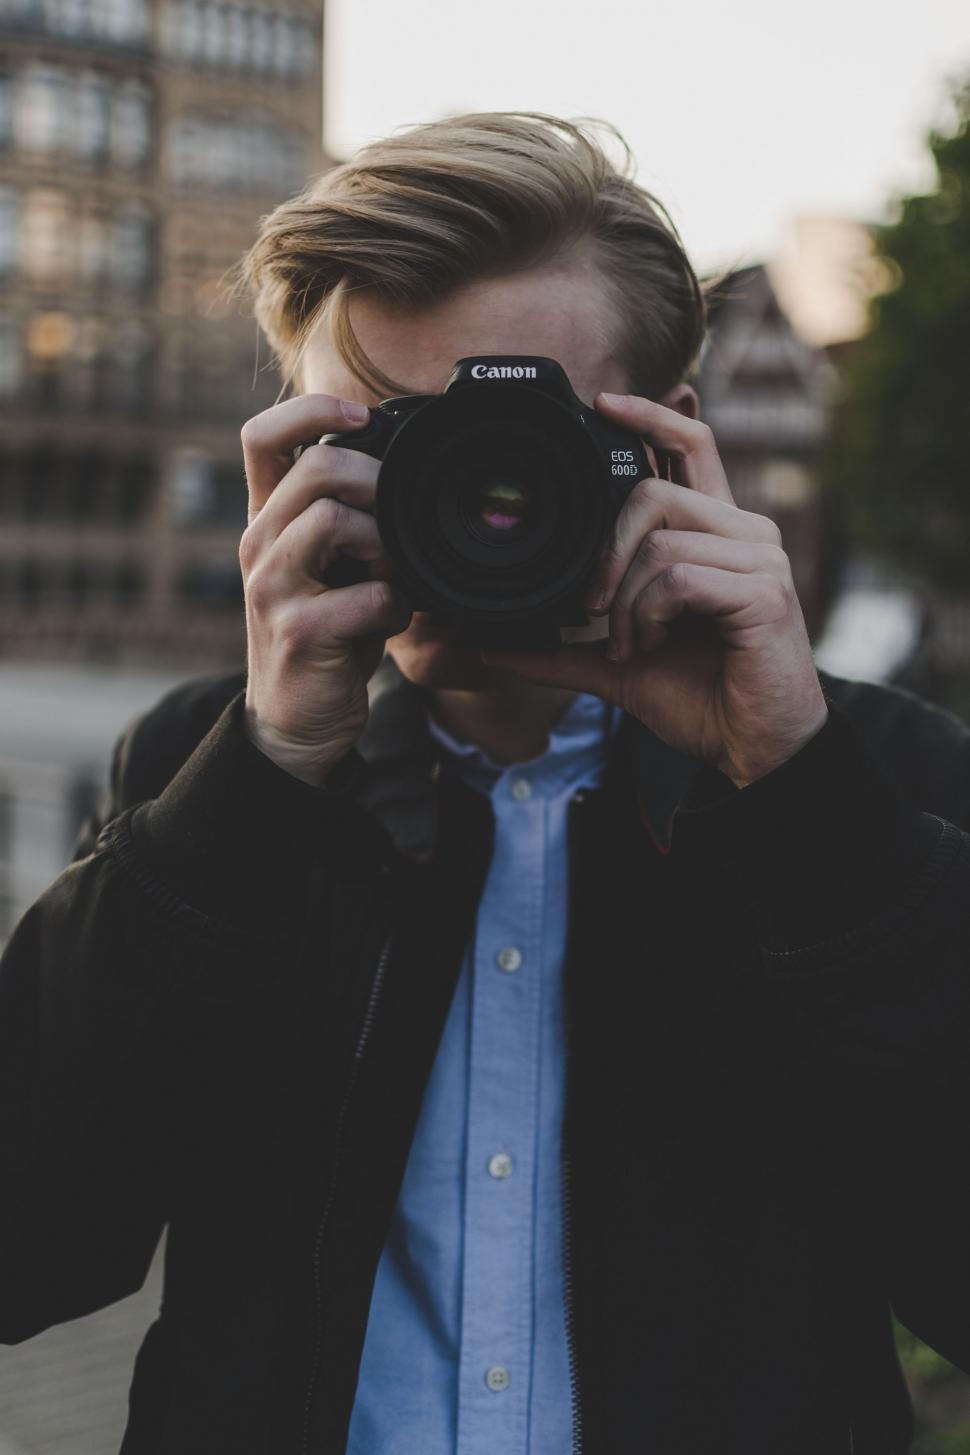 Free Image of Man Taking Picture of Himself With Camera 